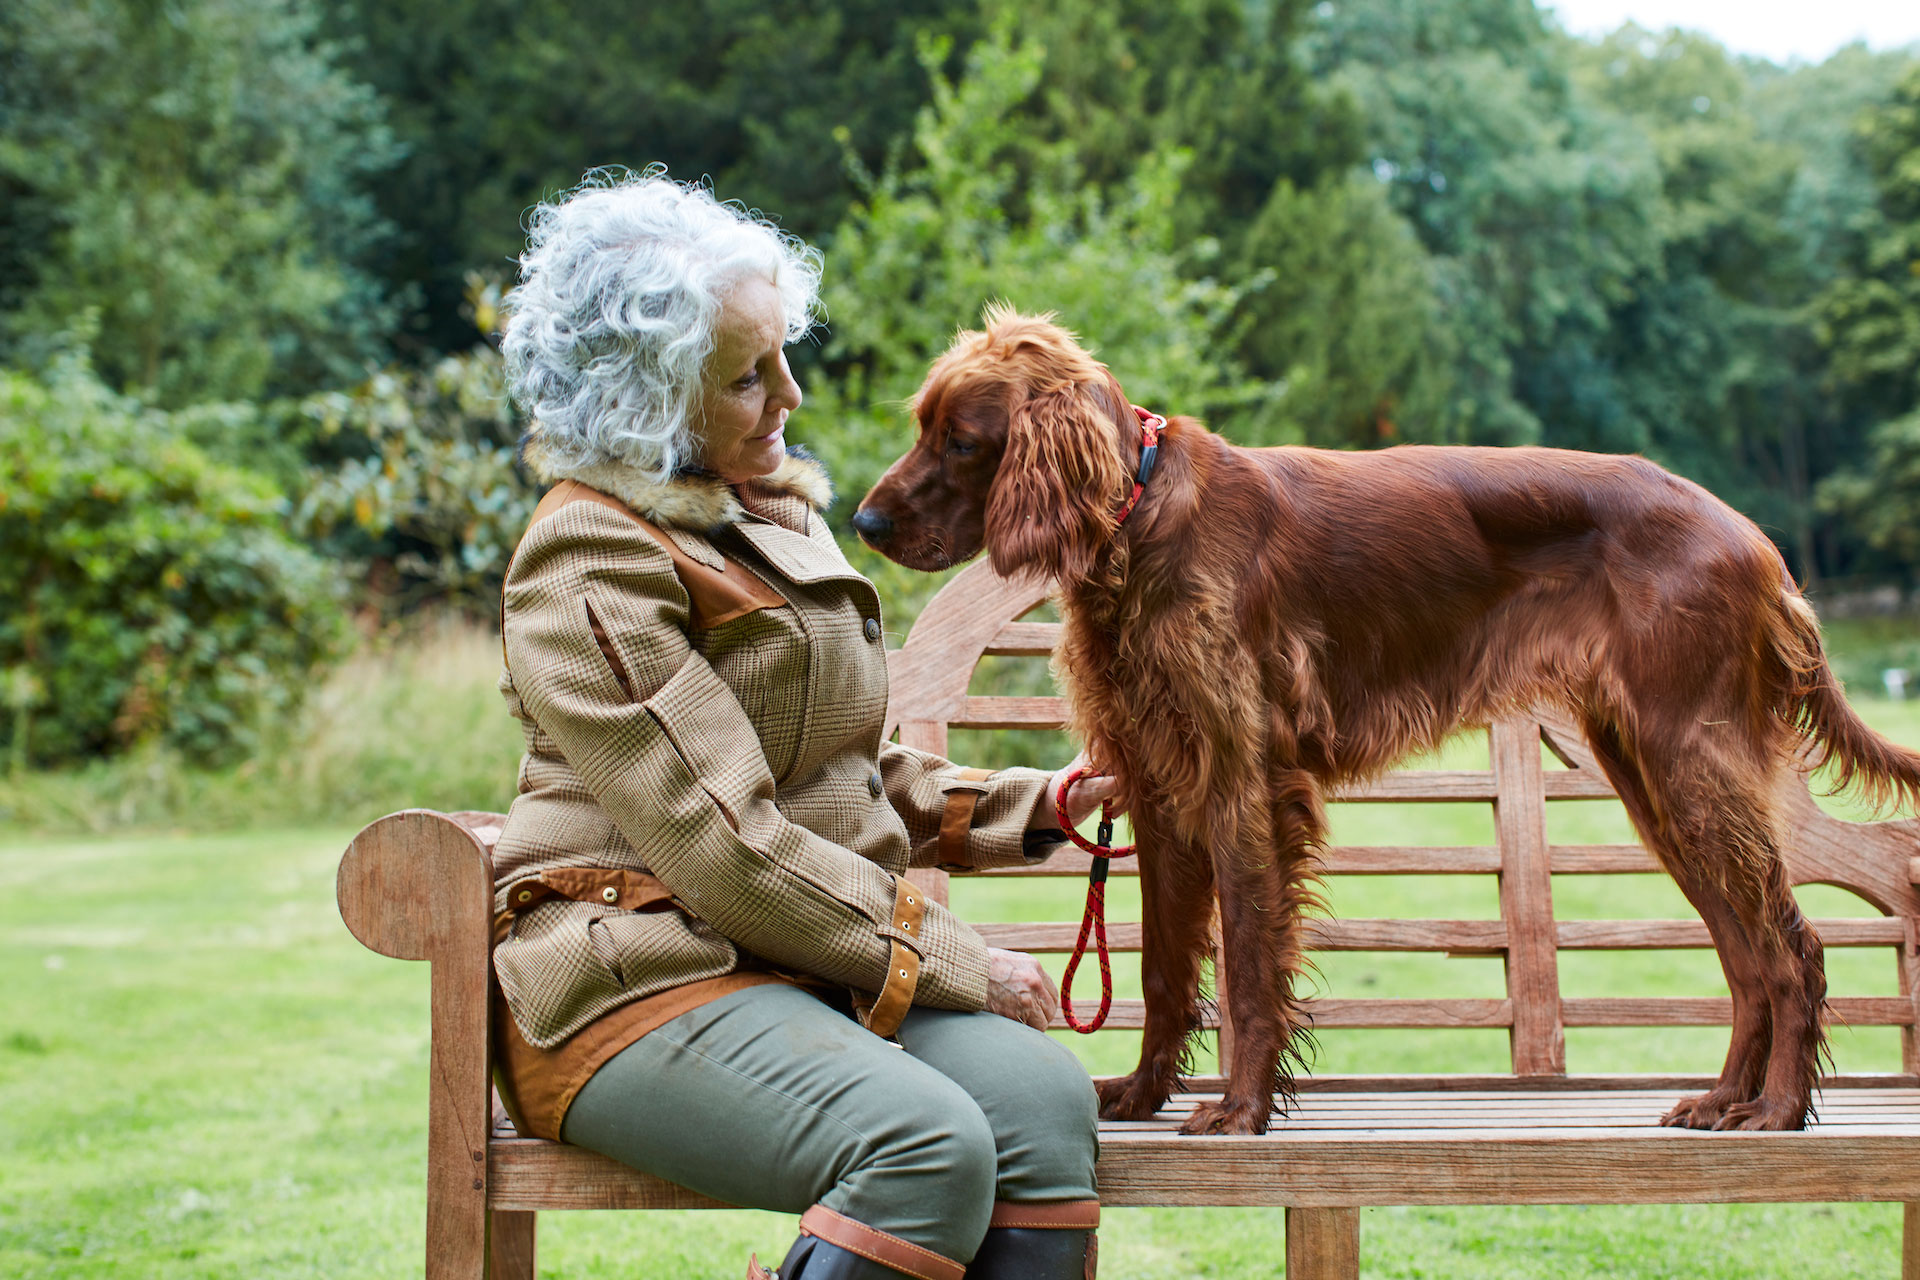 Philippa Gregory with dog sitting on bench